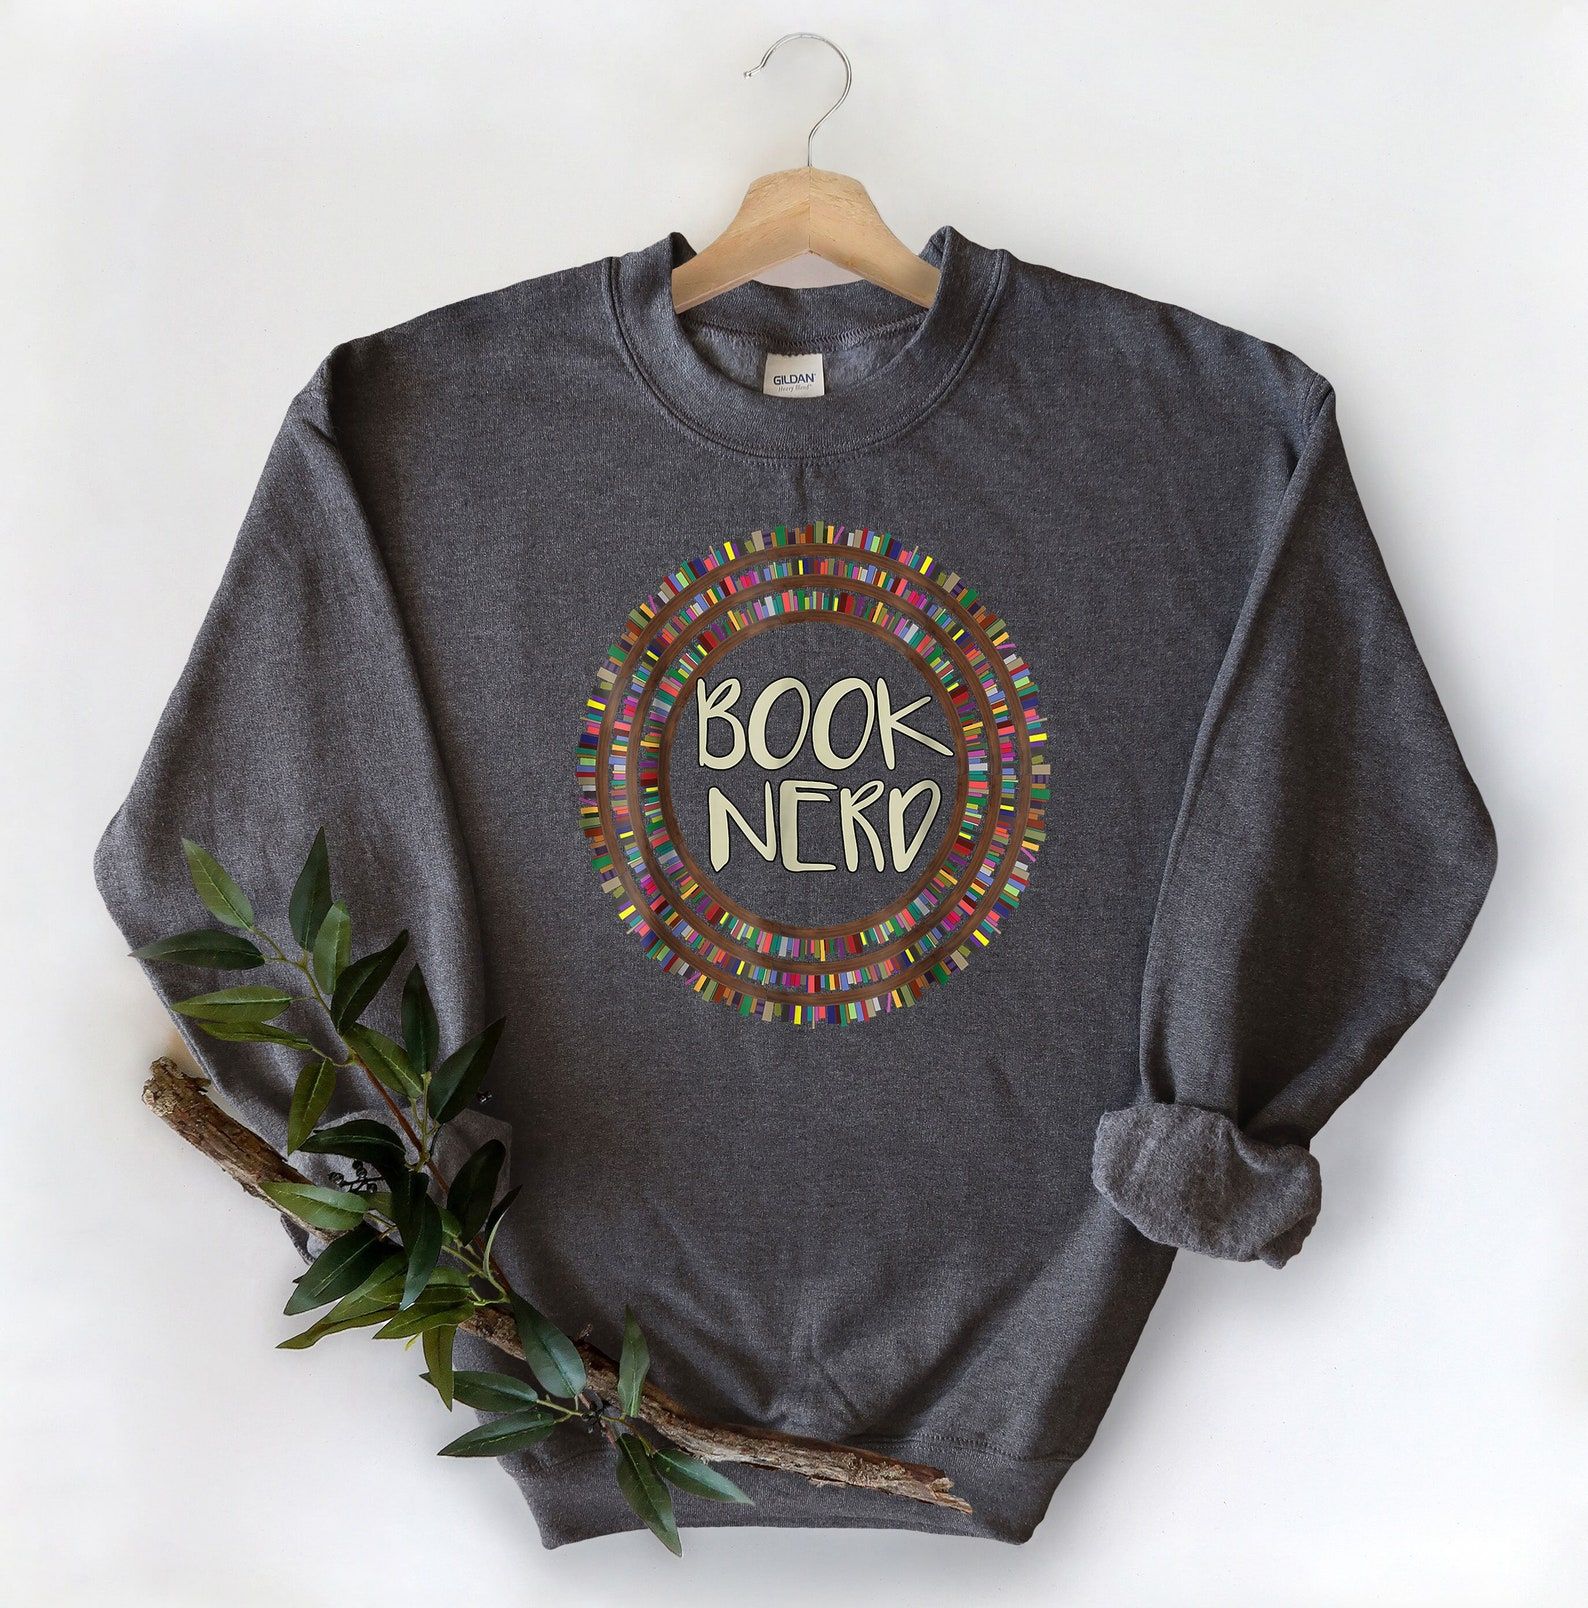 Image of a grey sweatshirt. The center has the words "book nerd" in a cream color. Surrounding the words are three circles made to be bookshelves. 